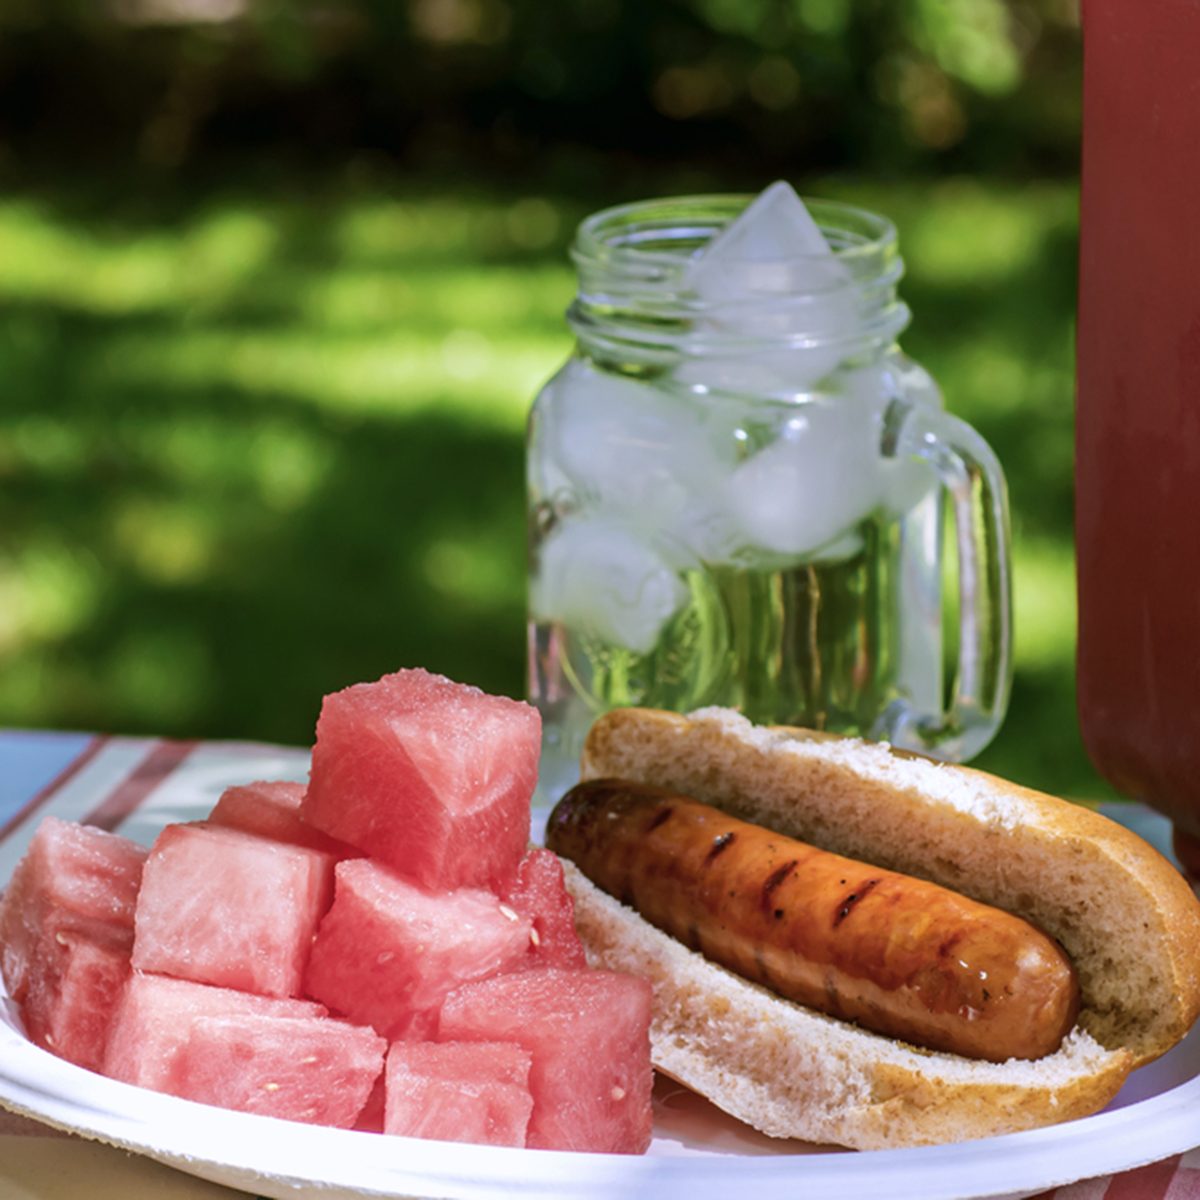 How To Keep Food Cold At A Picnic & Ensure Freshness